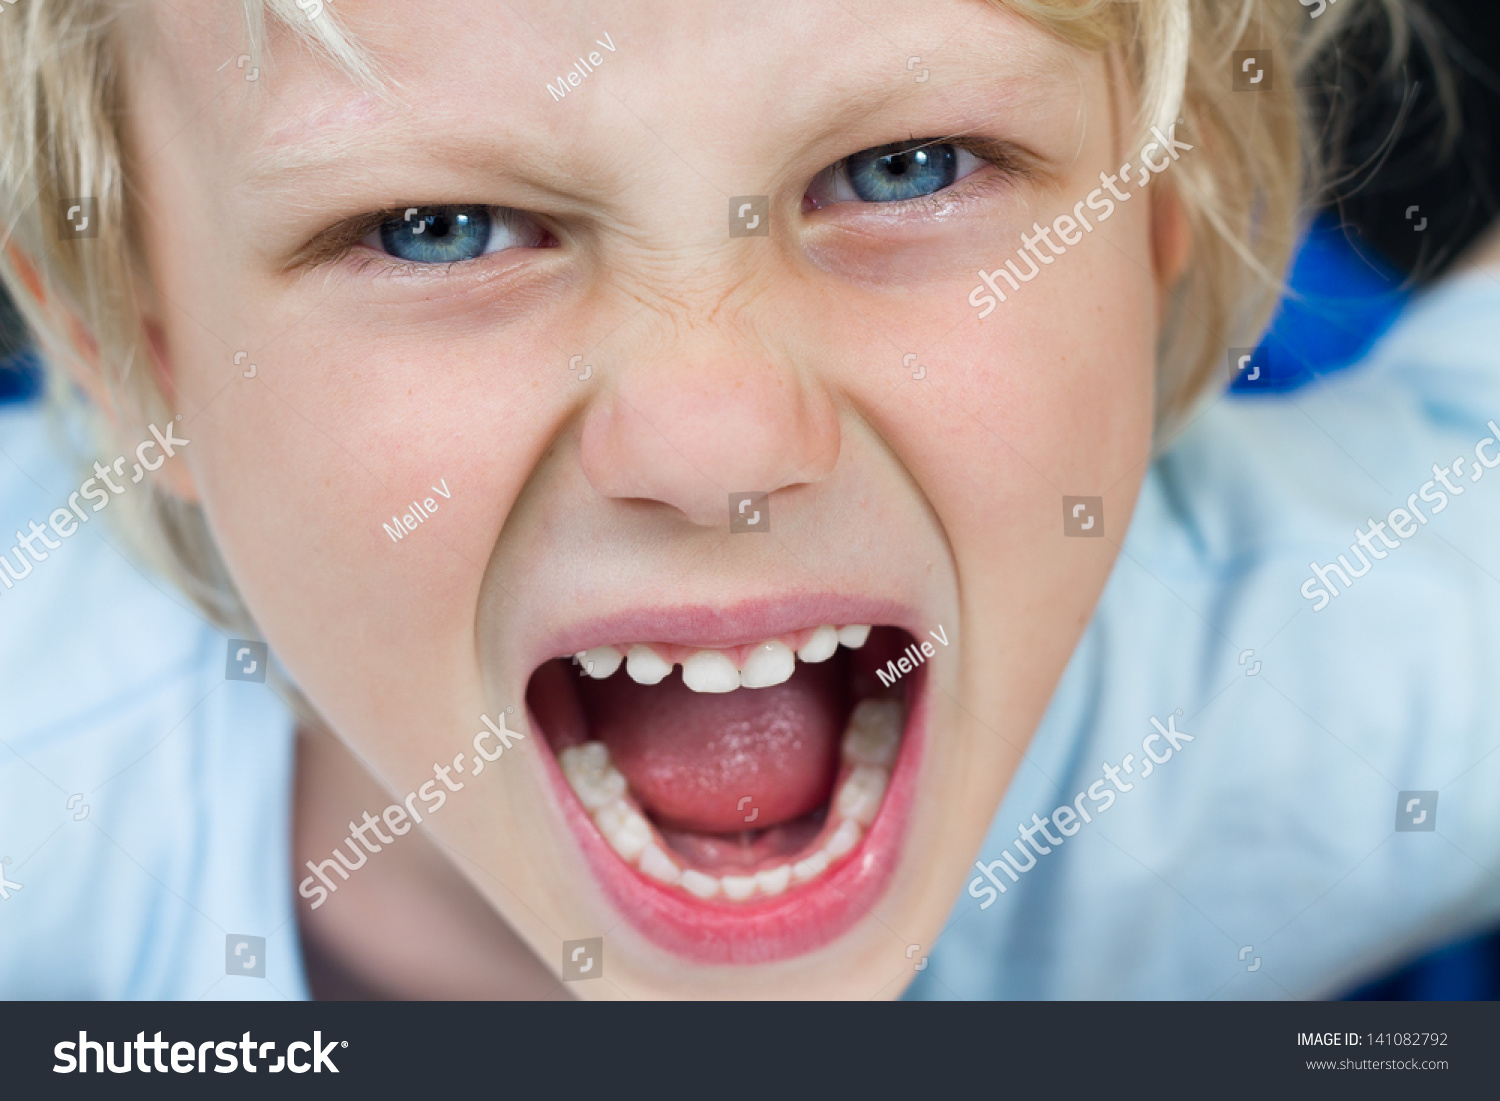 Close-Up Portrait Of A Very Angry Screaming Boy. Stock Photo 141082792 ...